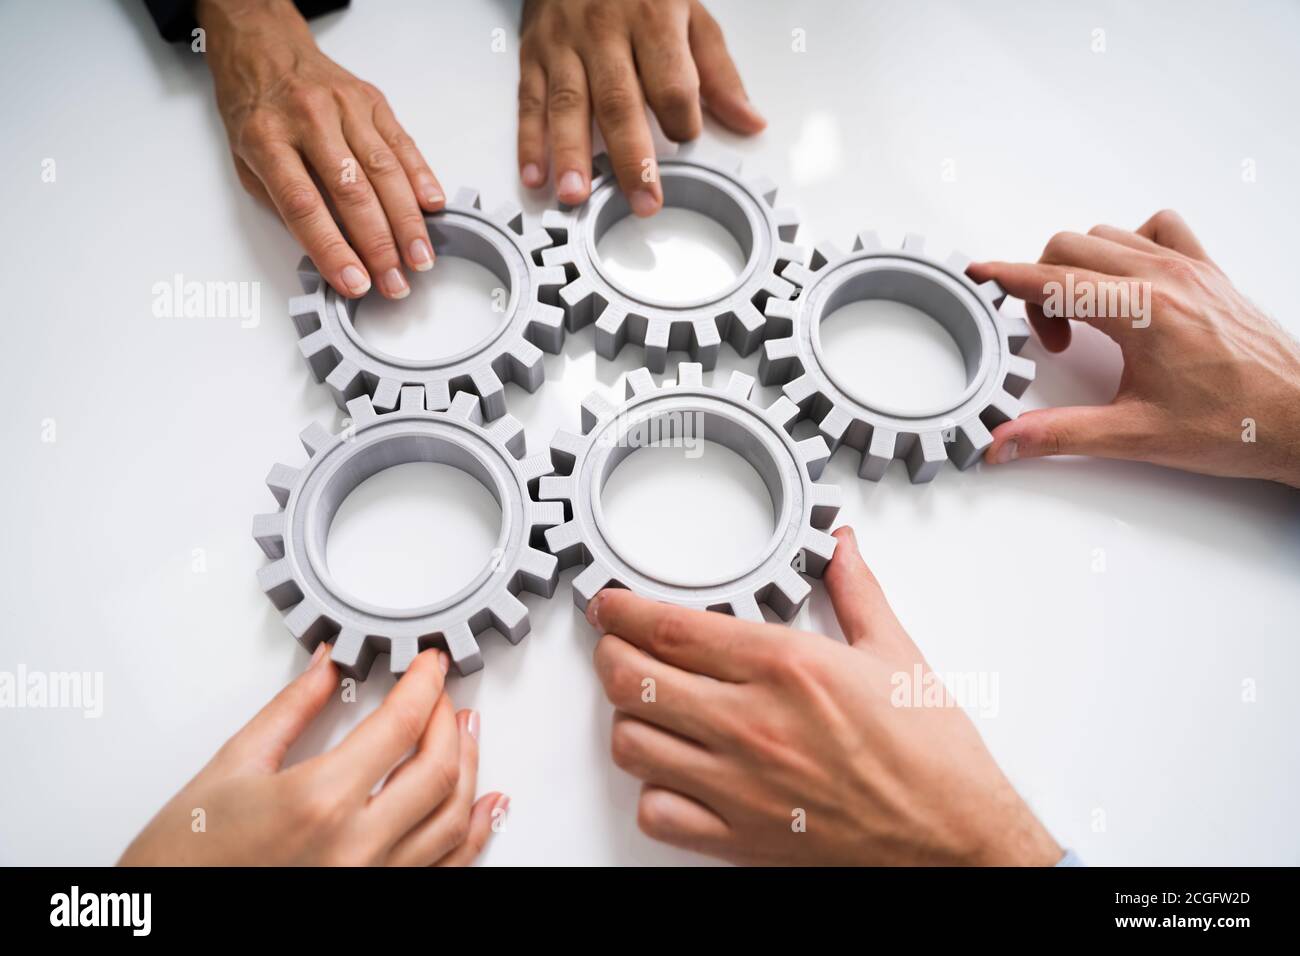 Innovative Businesspeople Team Hands Joining Gears At Desk Stock Photo